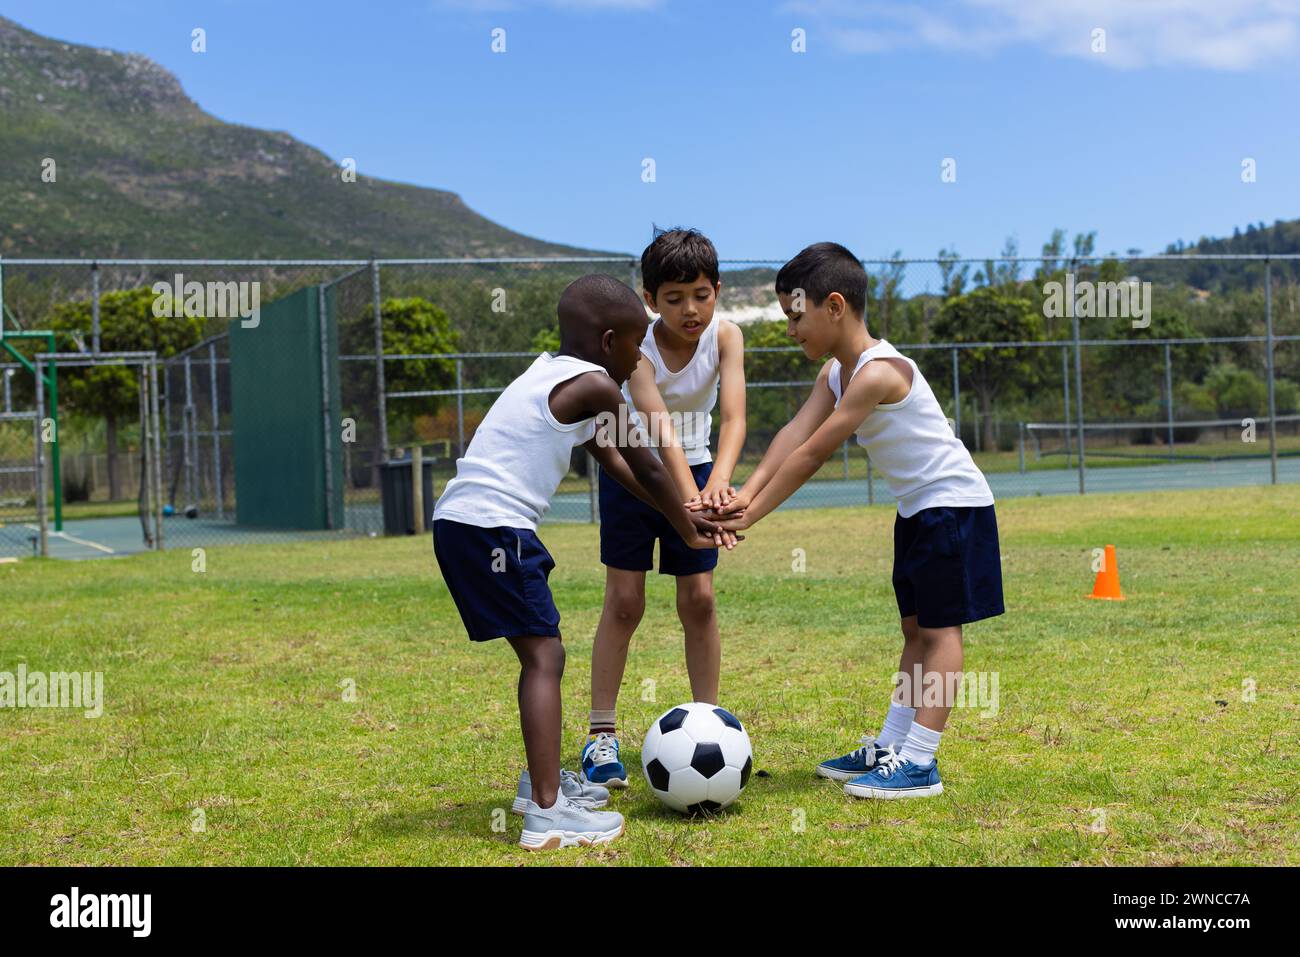 Three boys are huddled over a soccer ball on a grassy field, ready to play in school Stock Photo